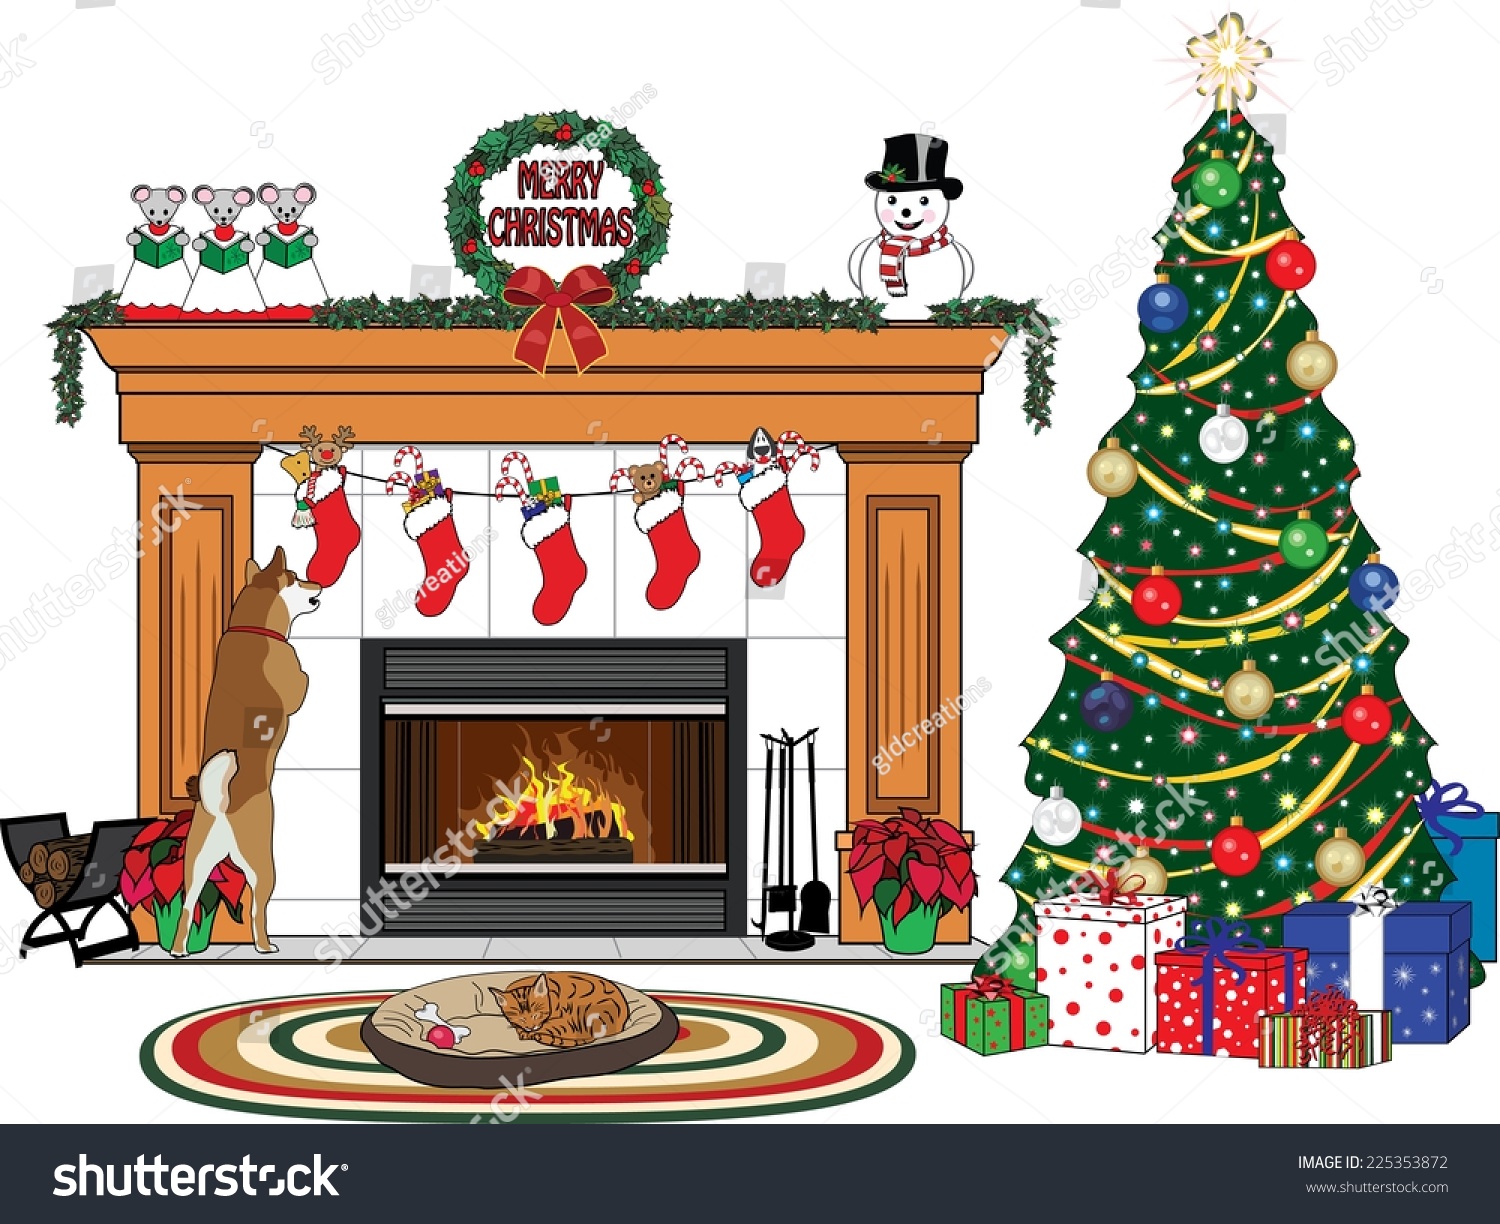 Stock Vector A Christmas Scene With A Christmas Tree Stockings With Presents A Fireplace A Dog Checking Out 225353872 Christmas Scene Christmas Tree Christmas